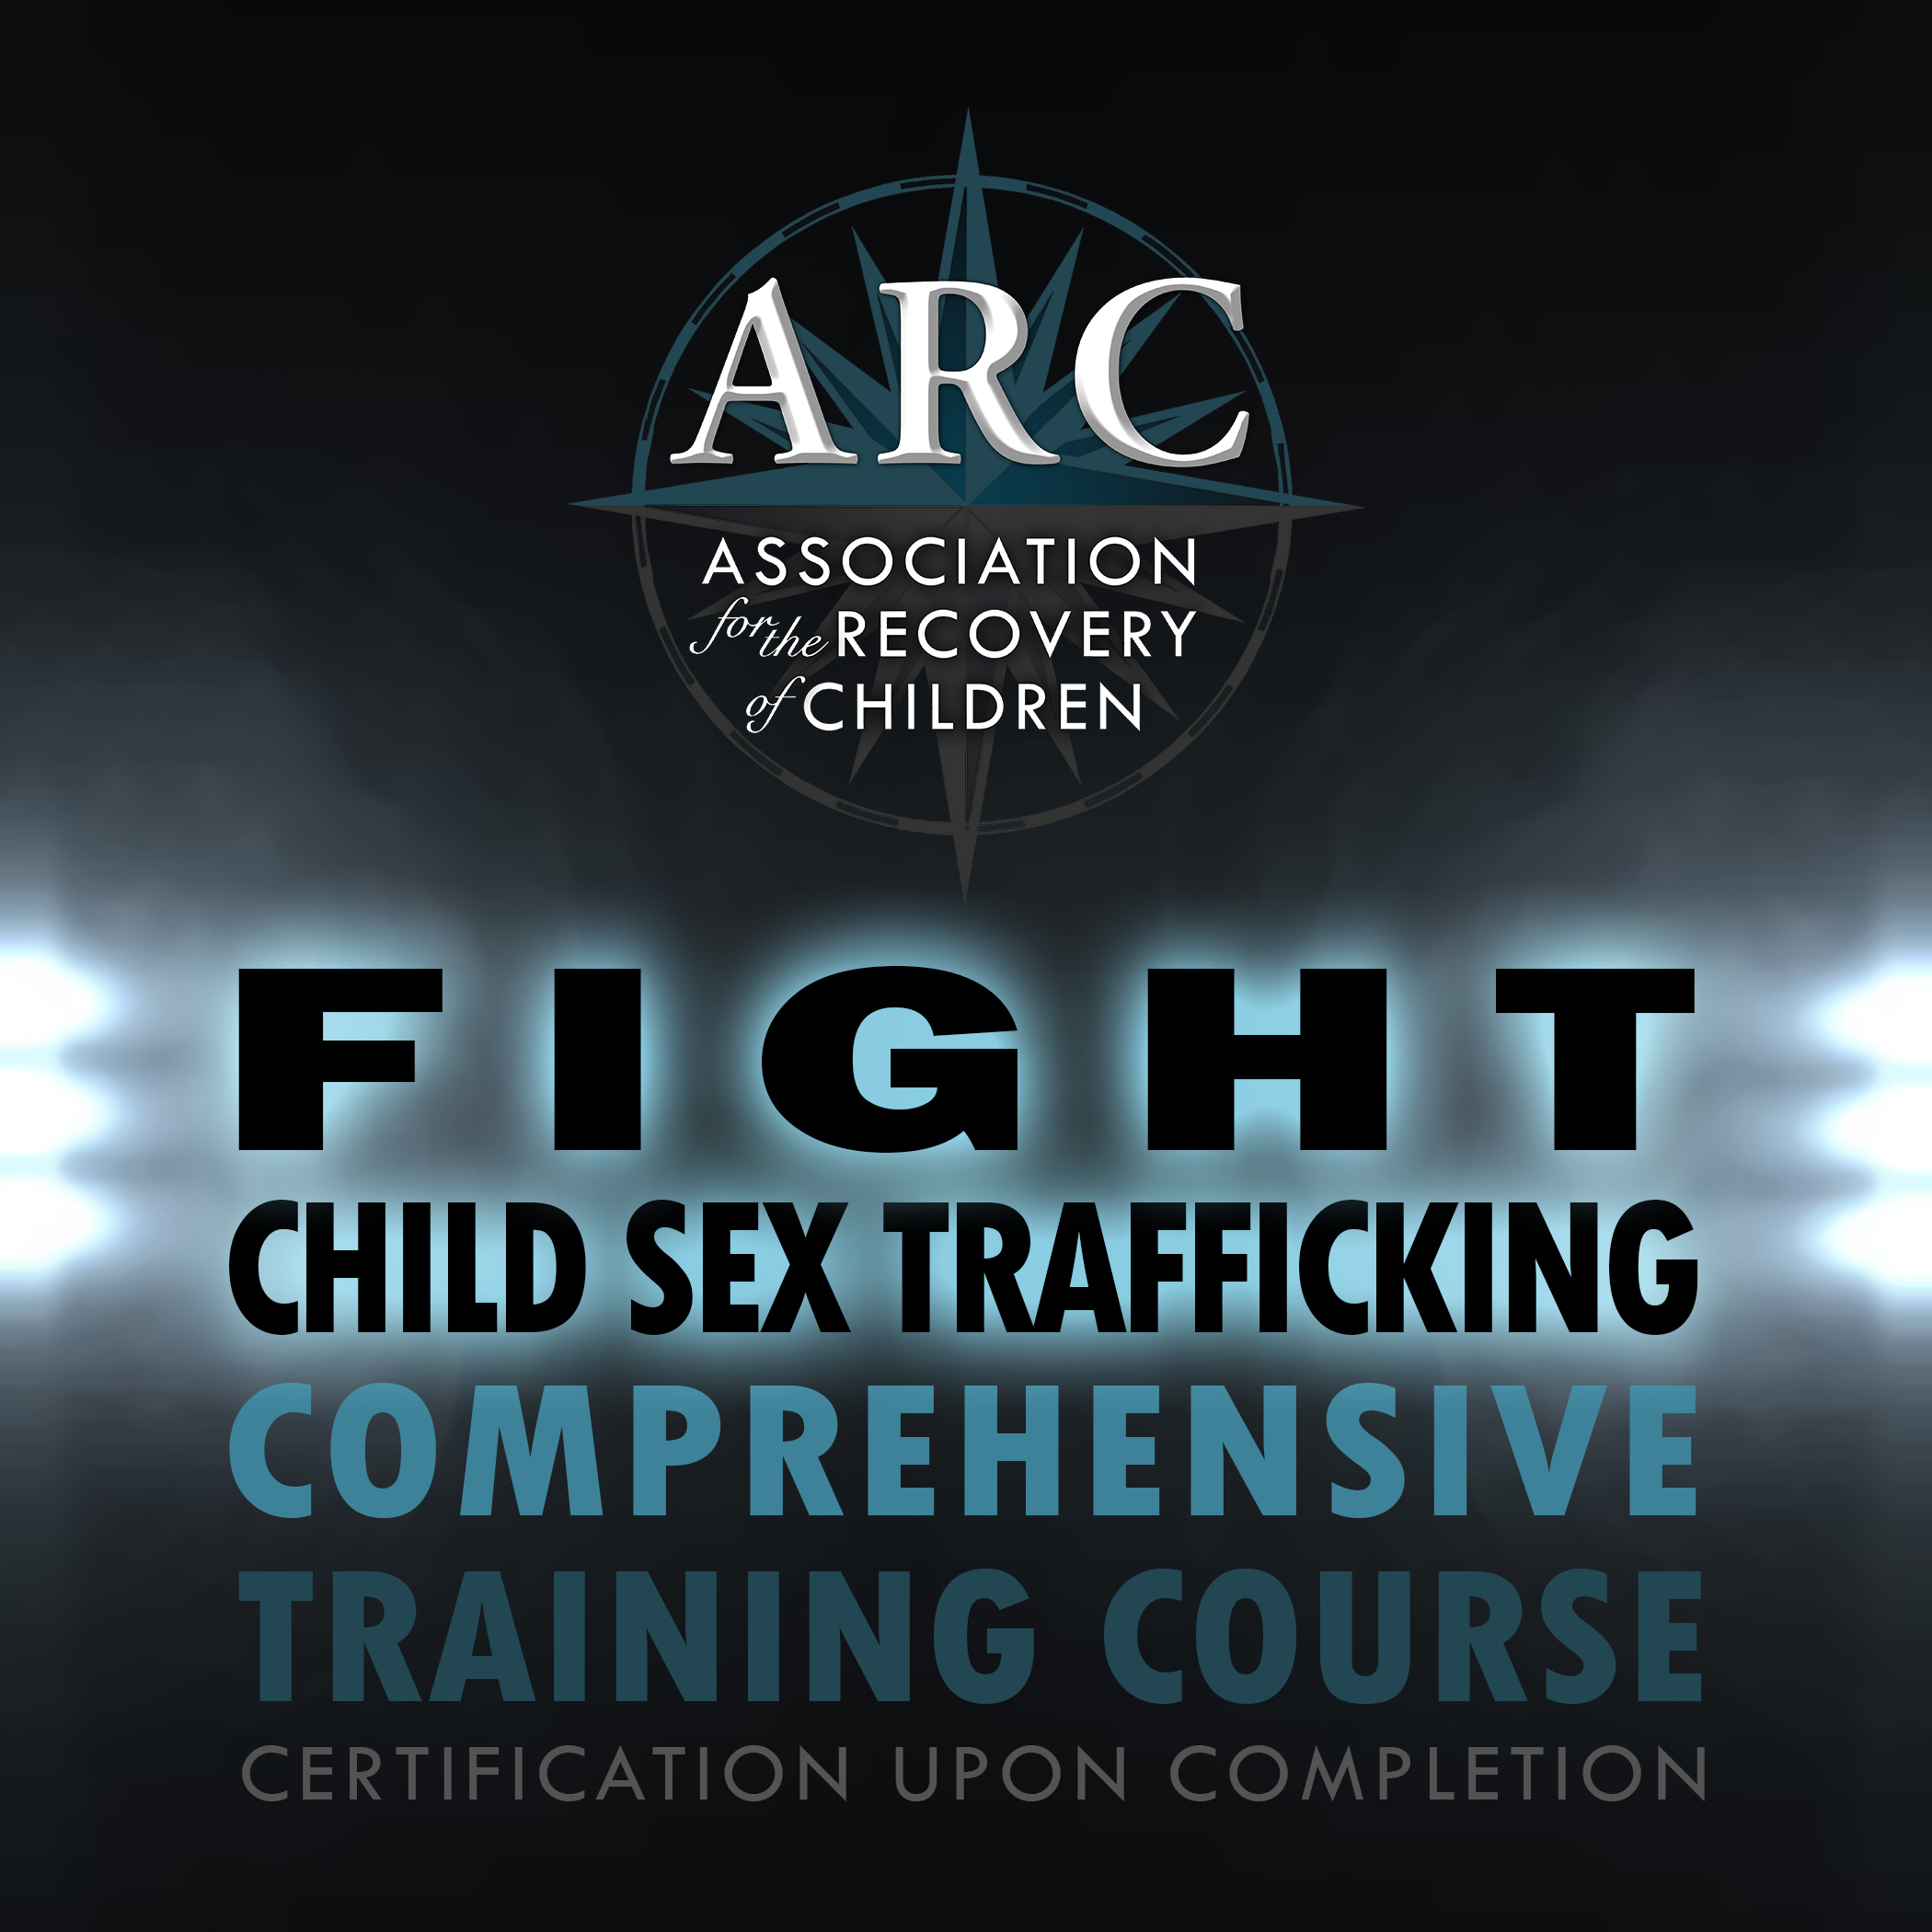 The Association for the Recovery of Children